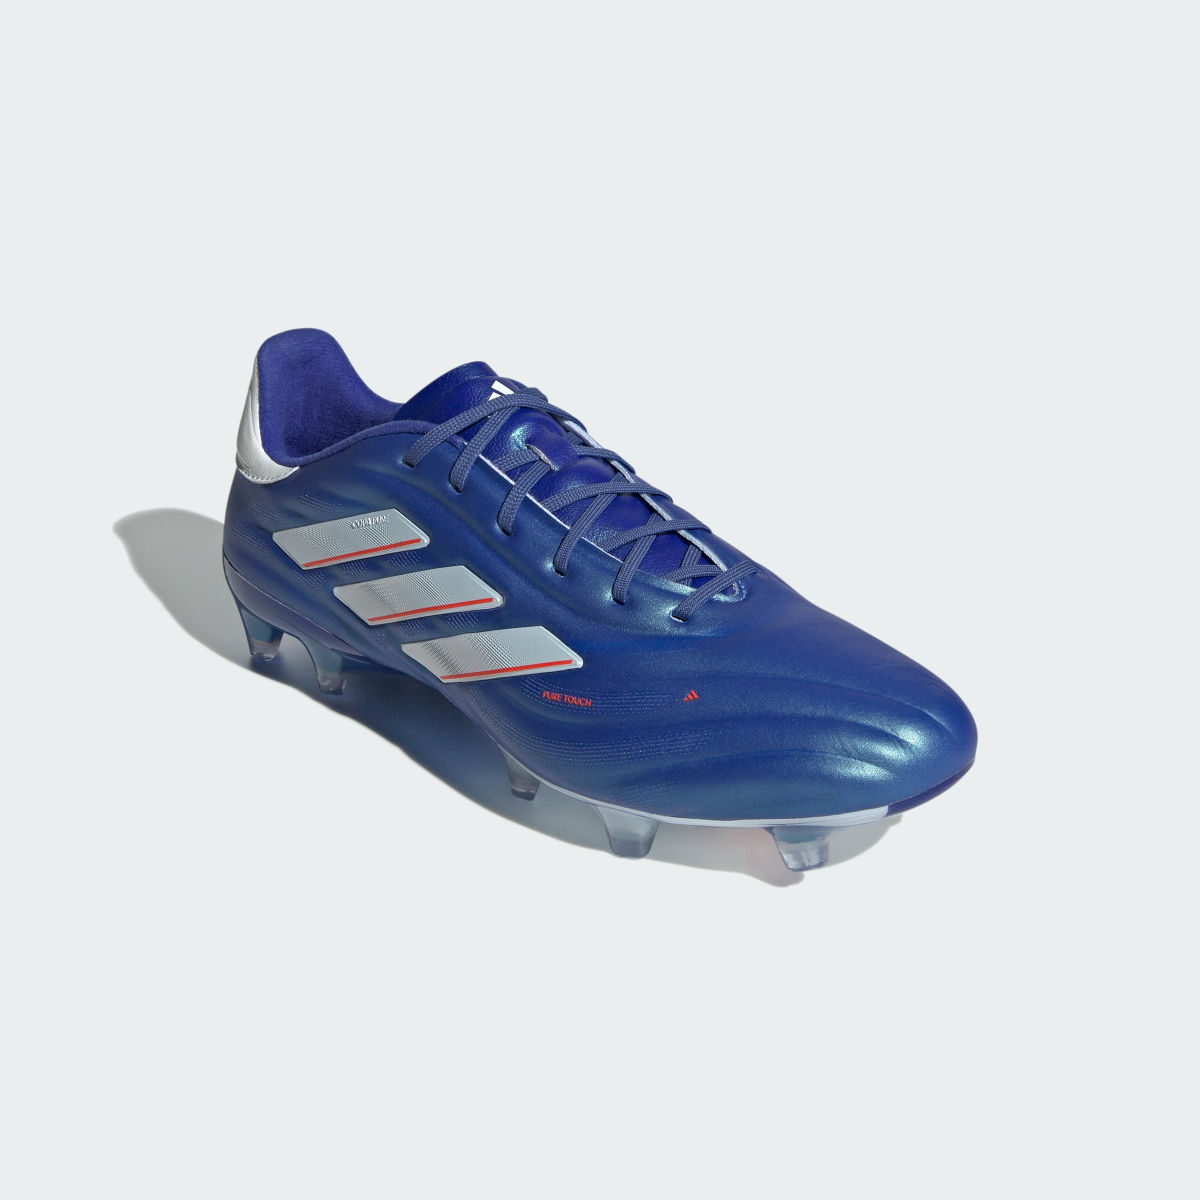 Adidas Copa Pure II.1 Firm Ground Boots. 8